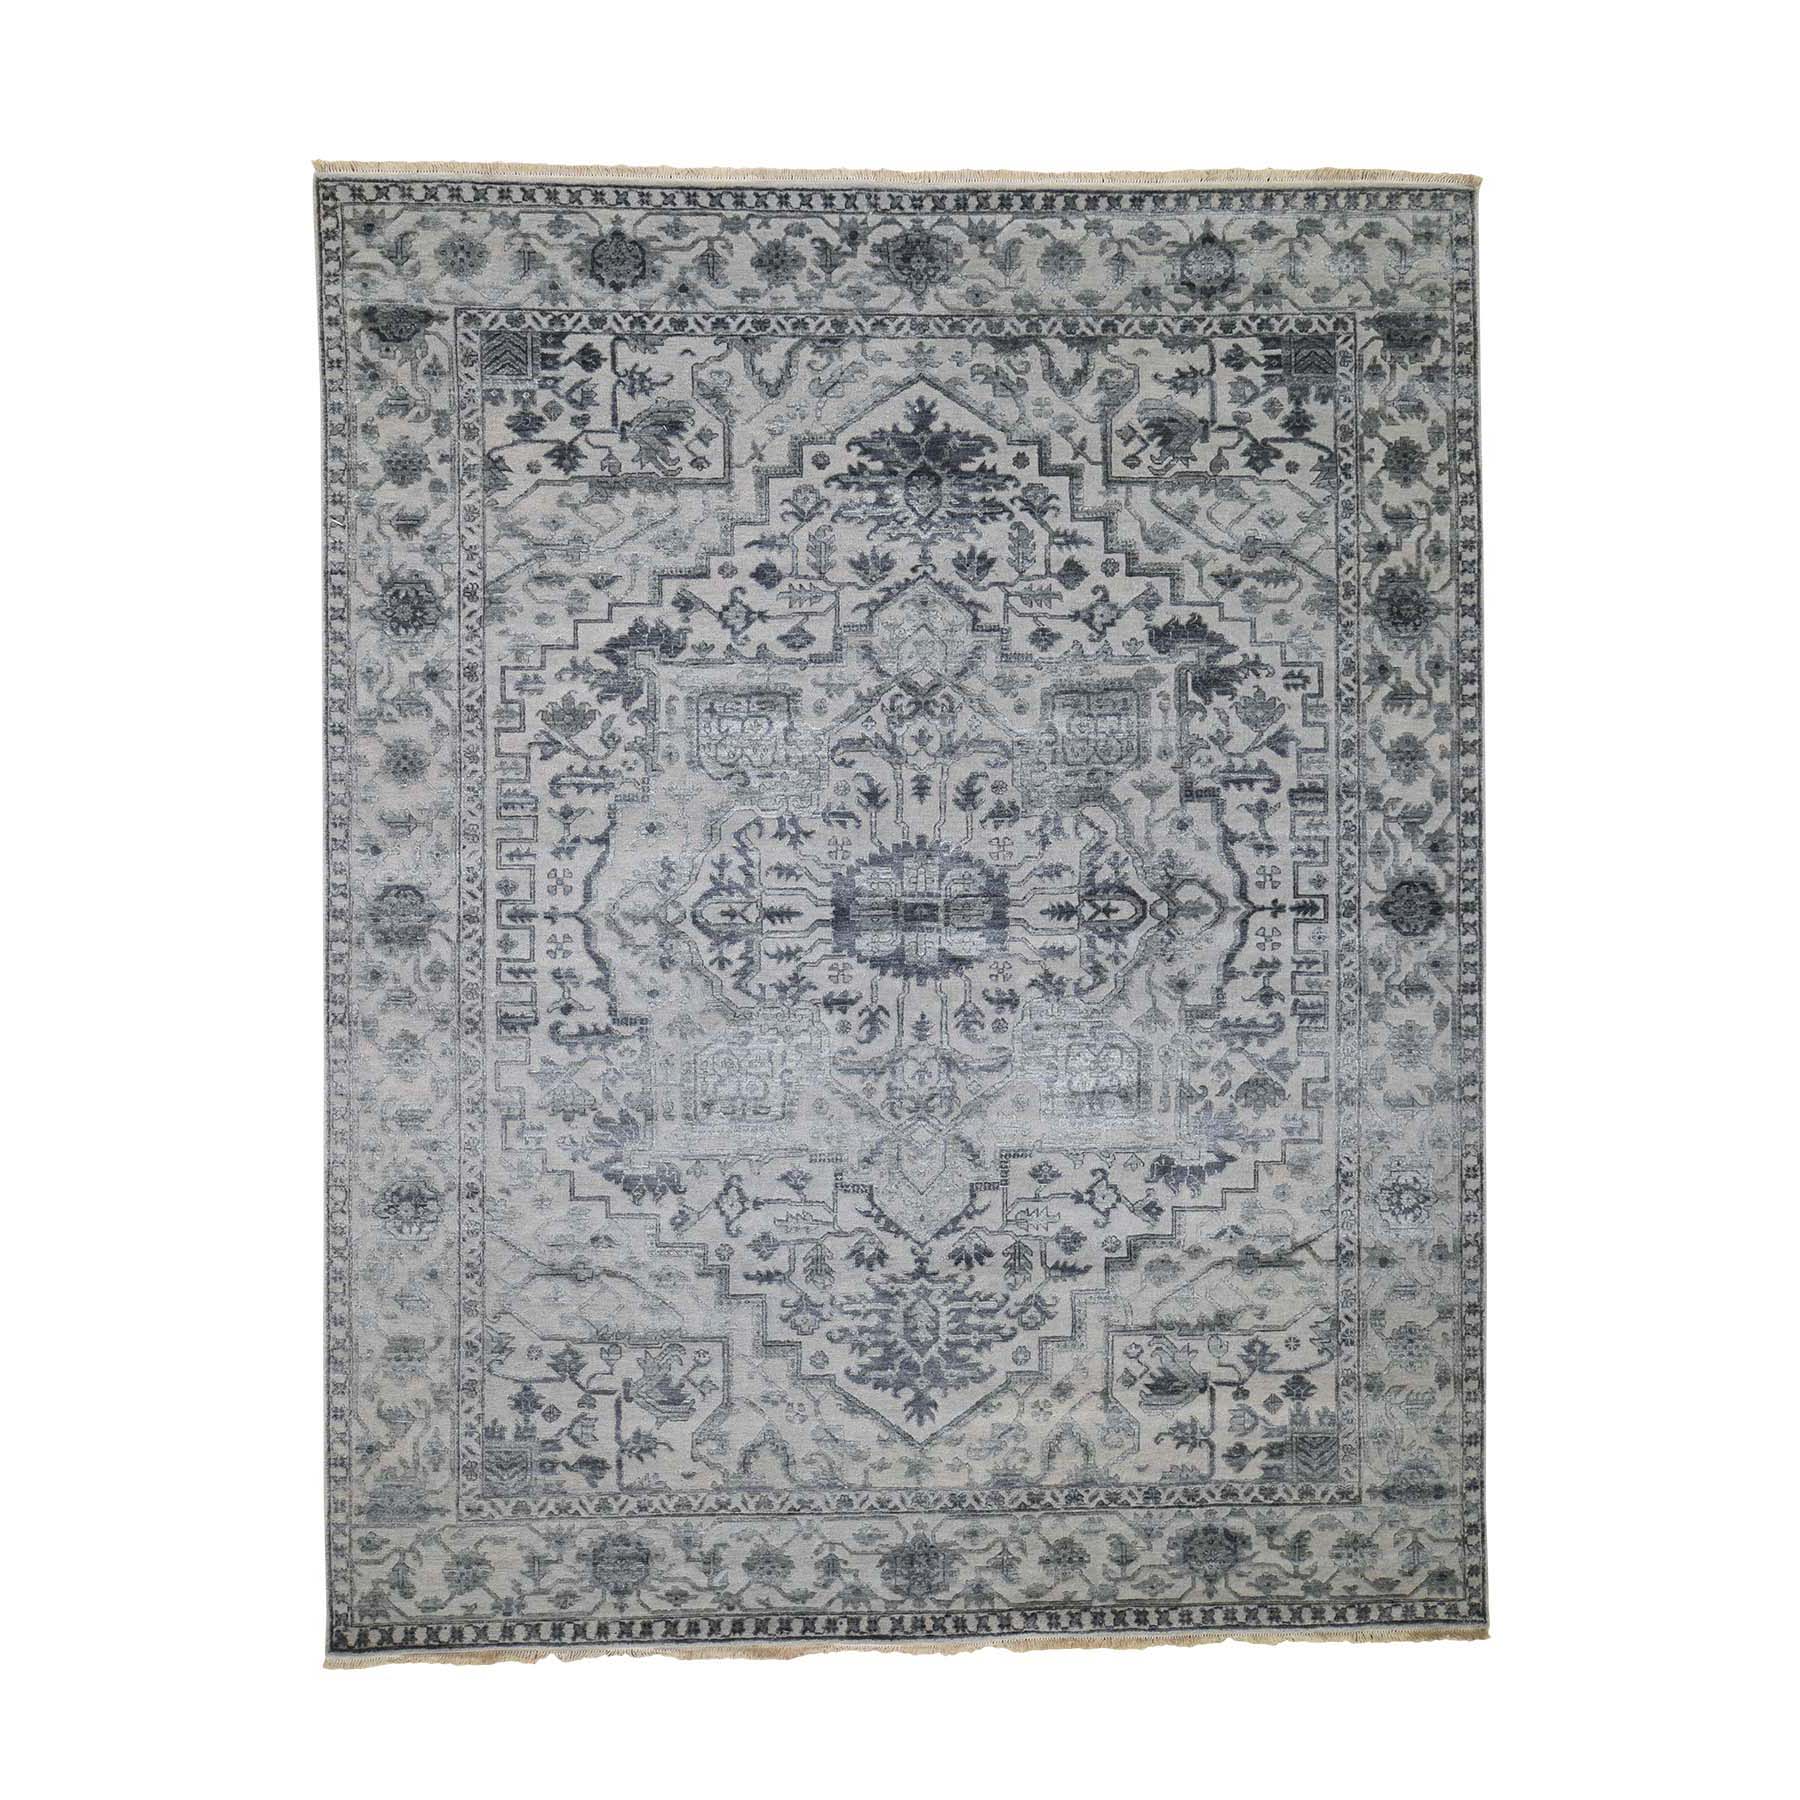 8-1 x10-1  Silver Heriz Design Wool And Silk Hi-lo Pile Hand-Knotted Oriental Rug 